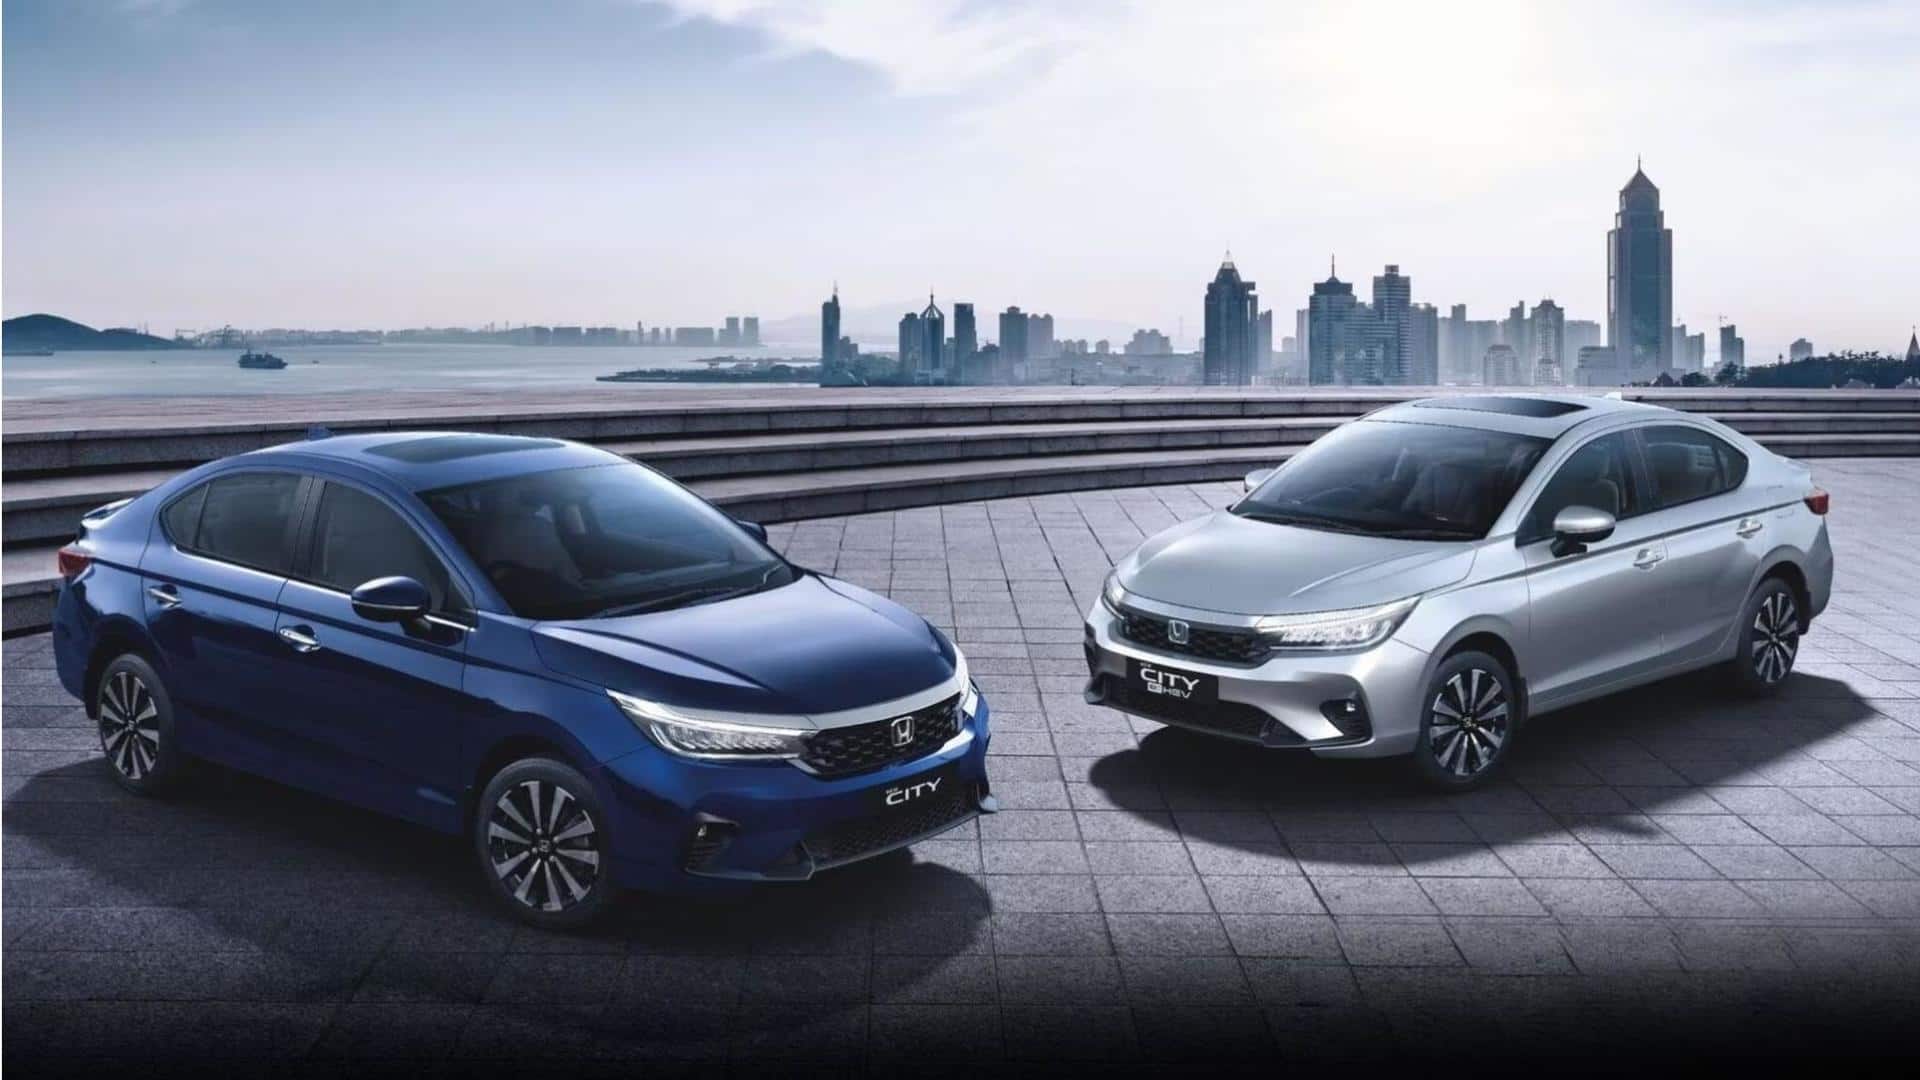 2023 Honda City variants explained: Which one offers best value